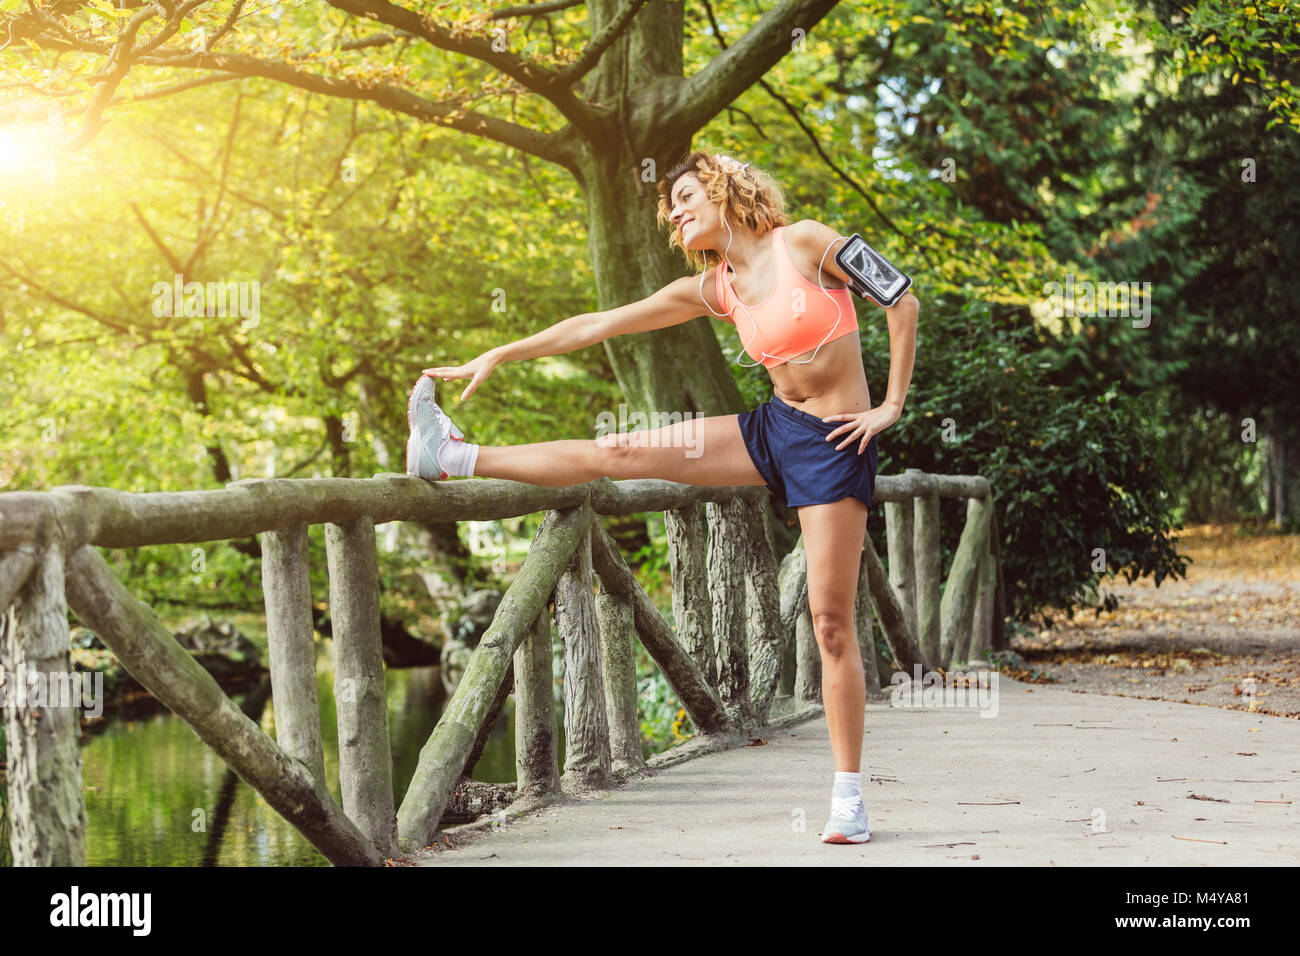 young fitness woman runner stretching legs before run Stock Photo